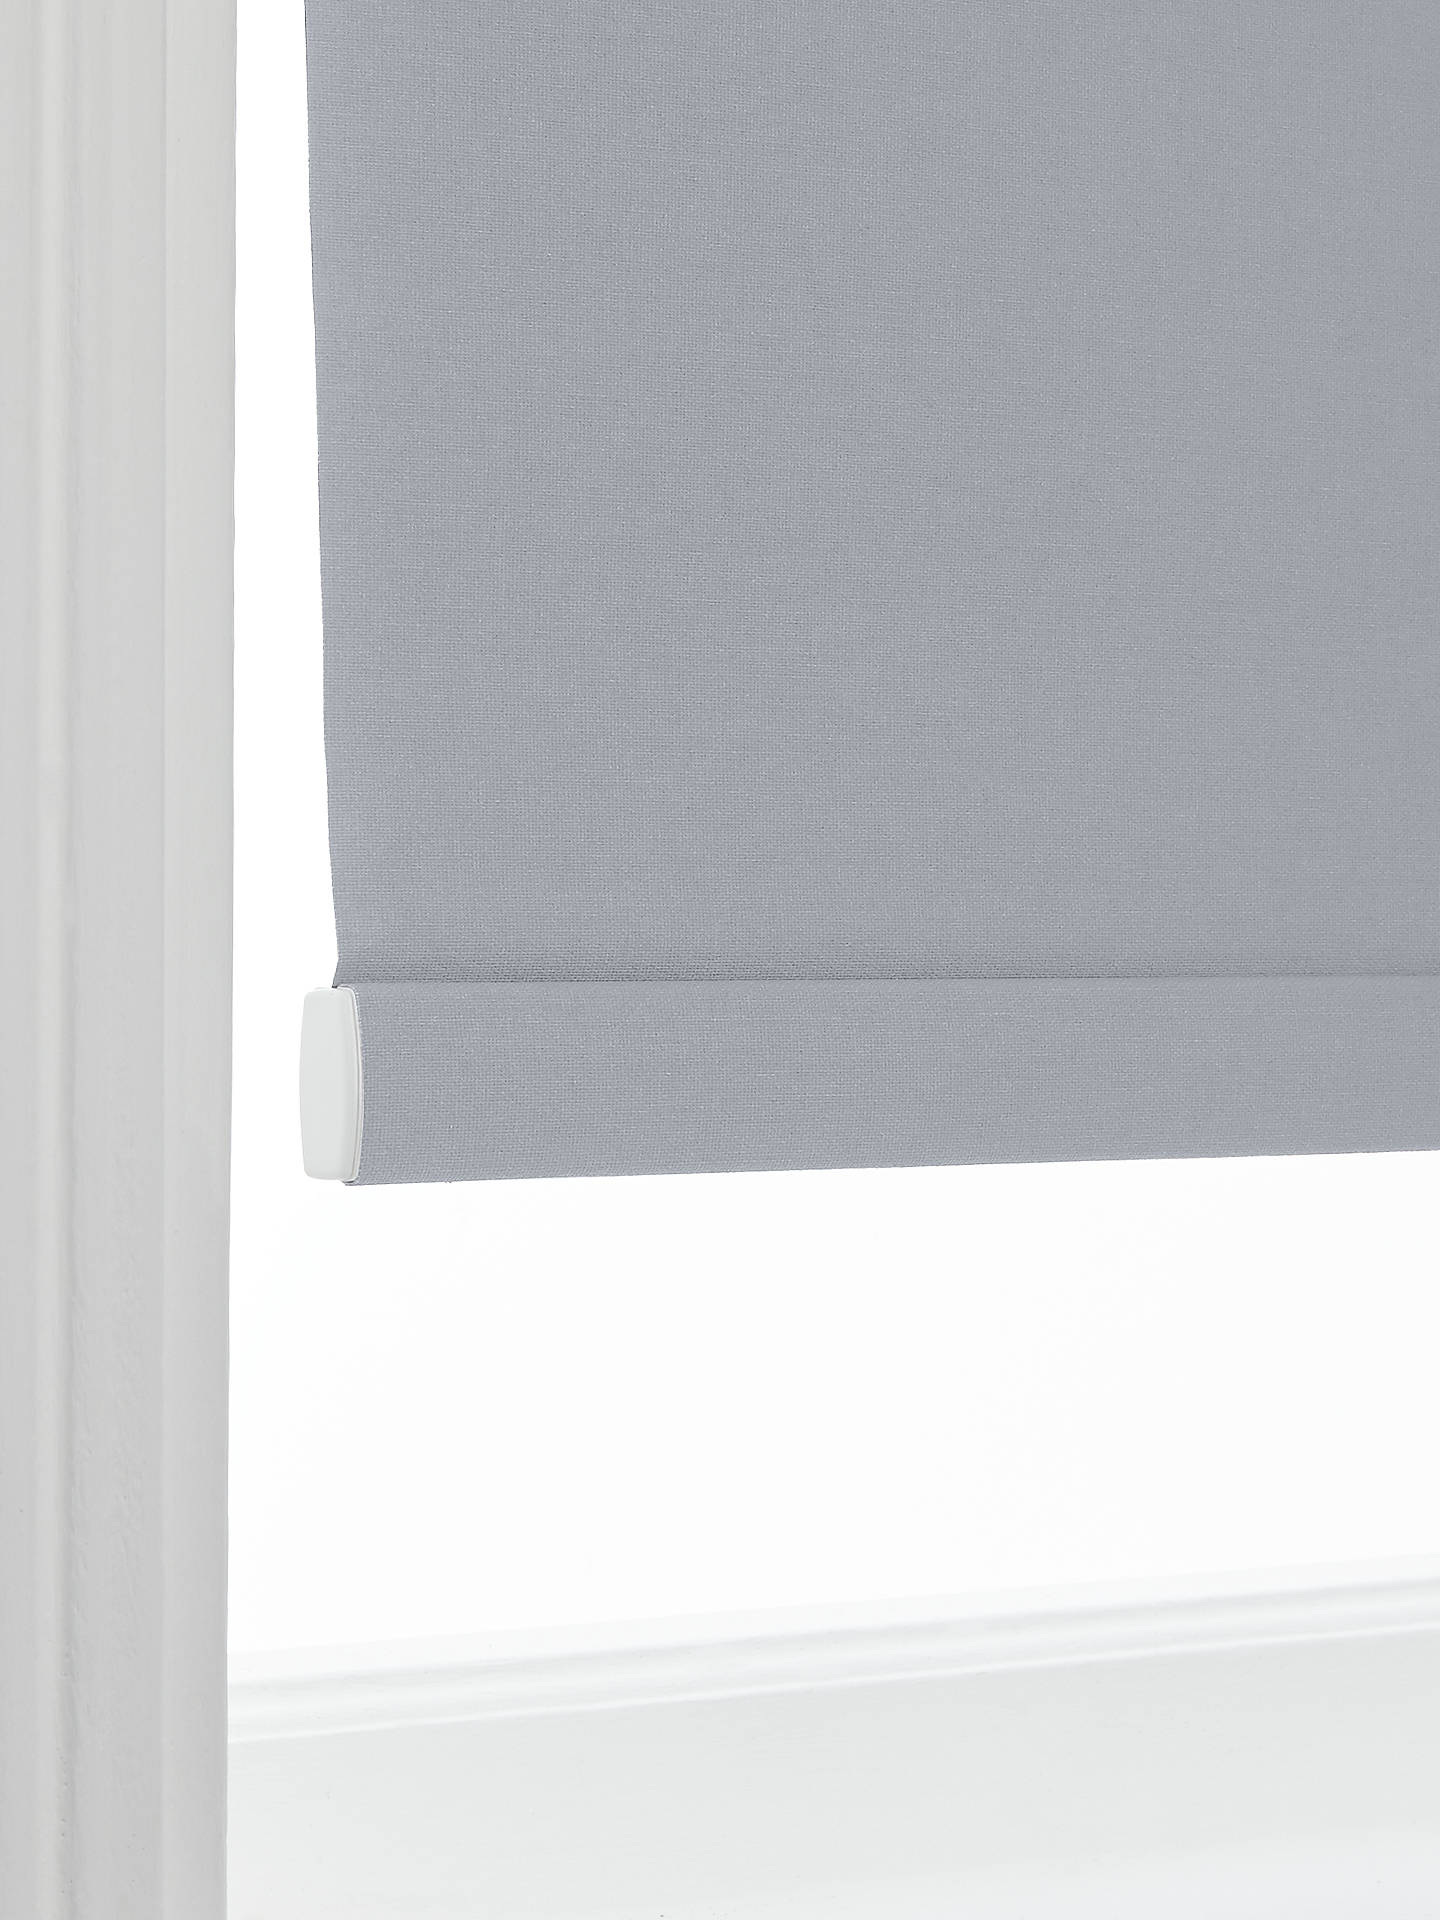 John Lewis Lima Made to Measure Blackout Roller Blind, Cloudy Blue